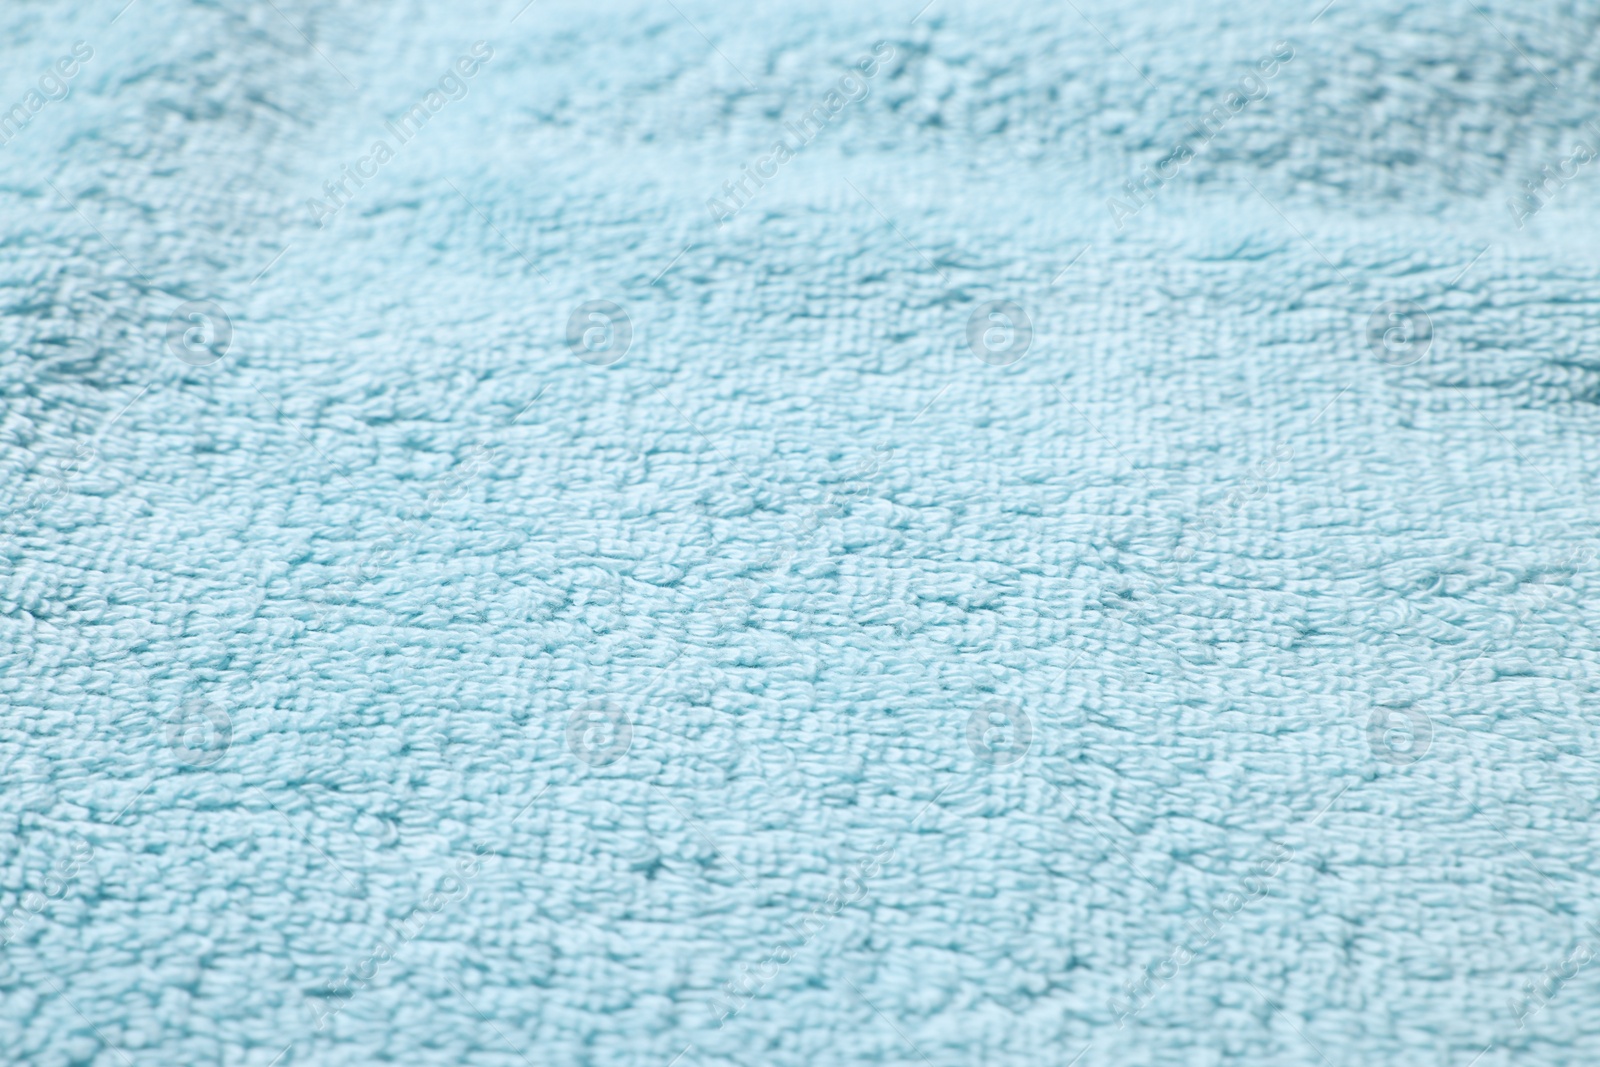 Photo of Texture of soft light blue fabric as background, closeup